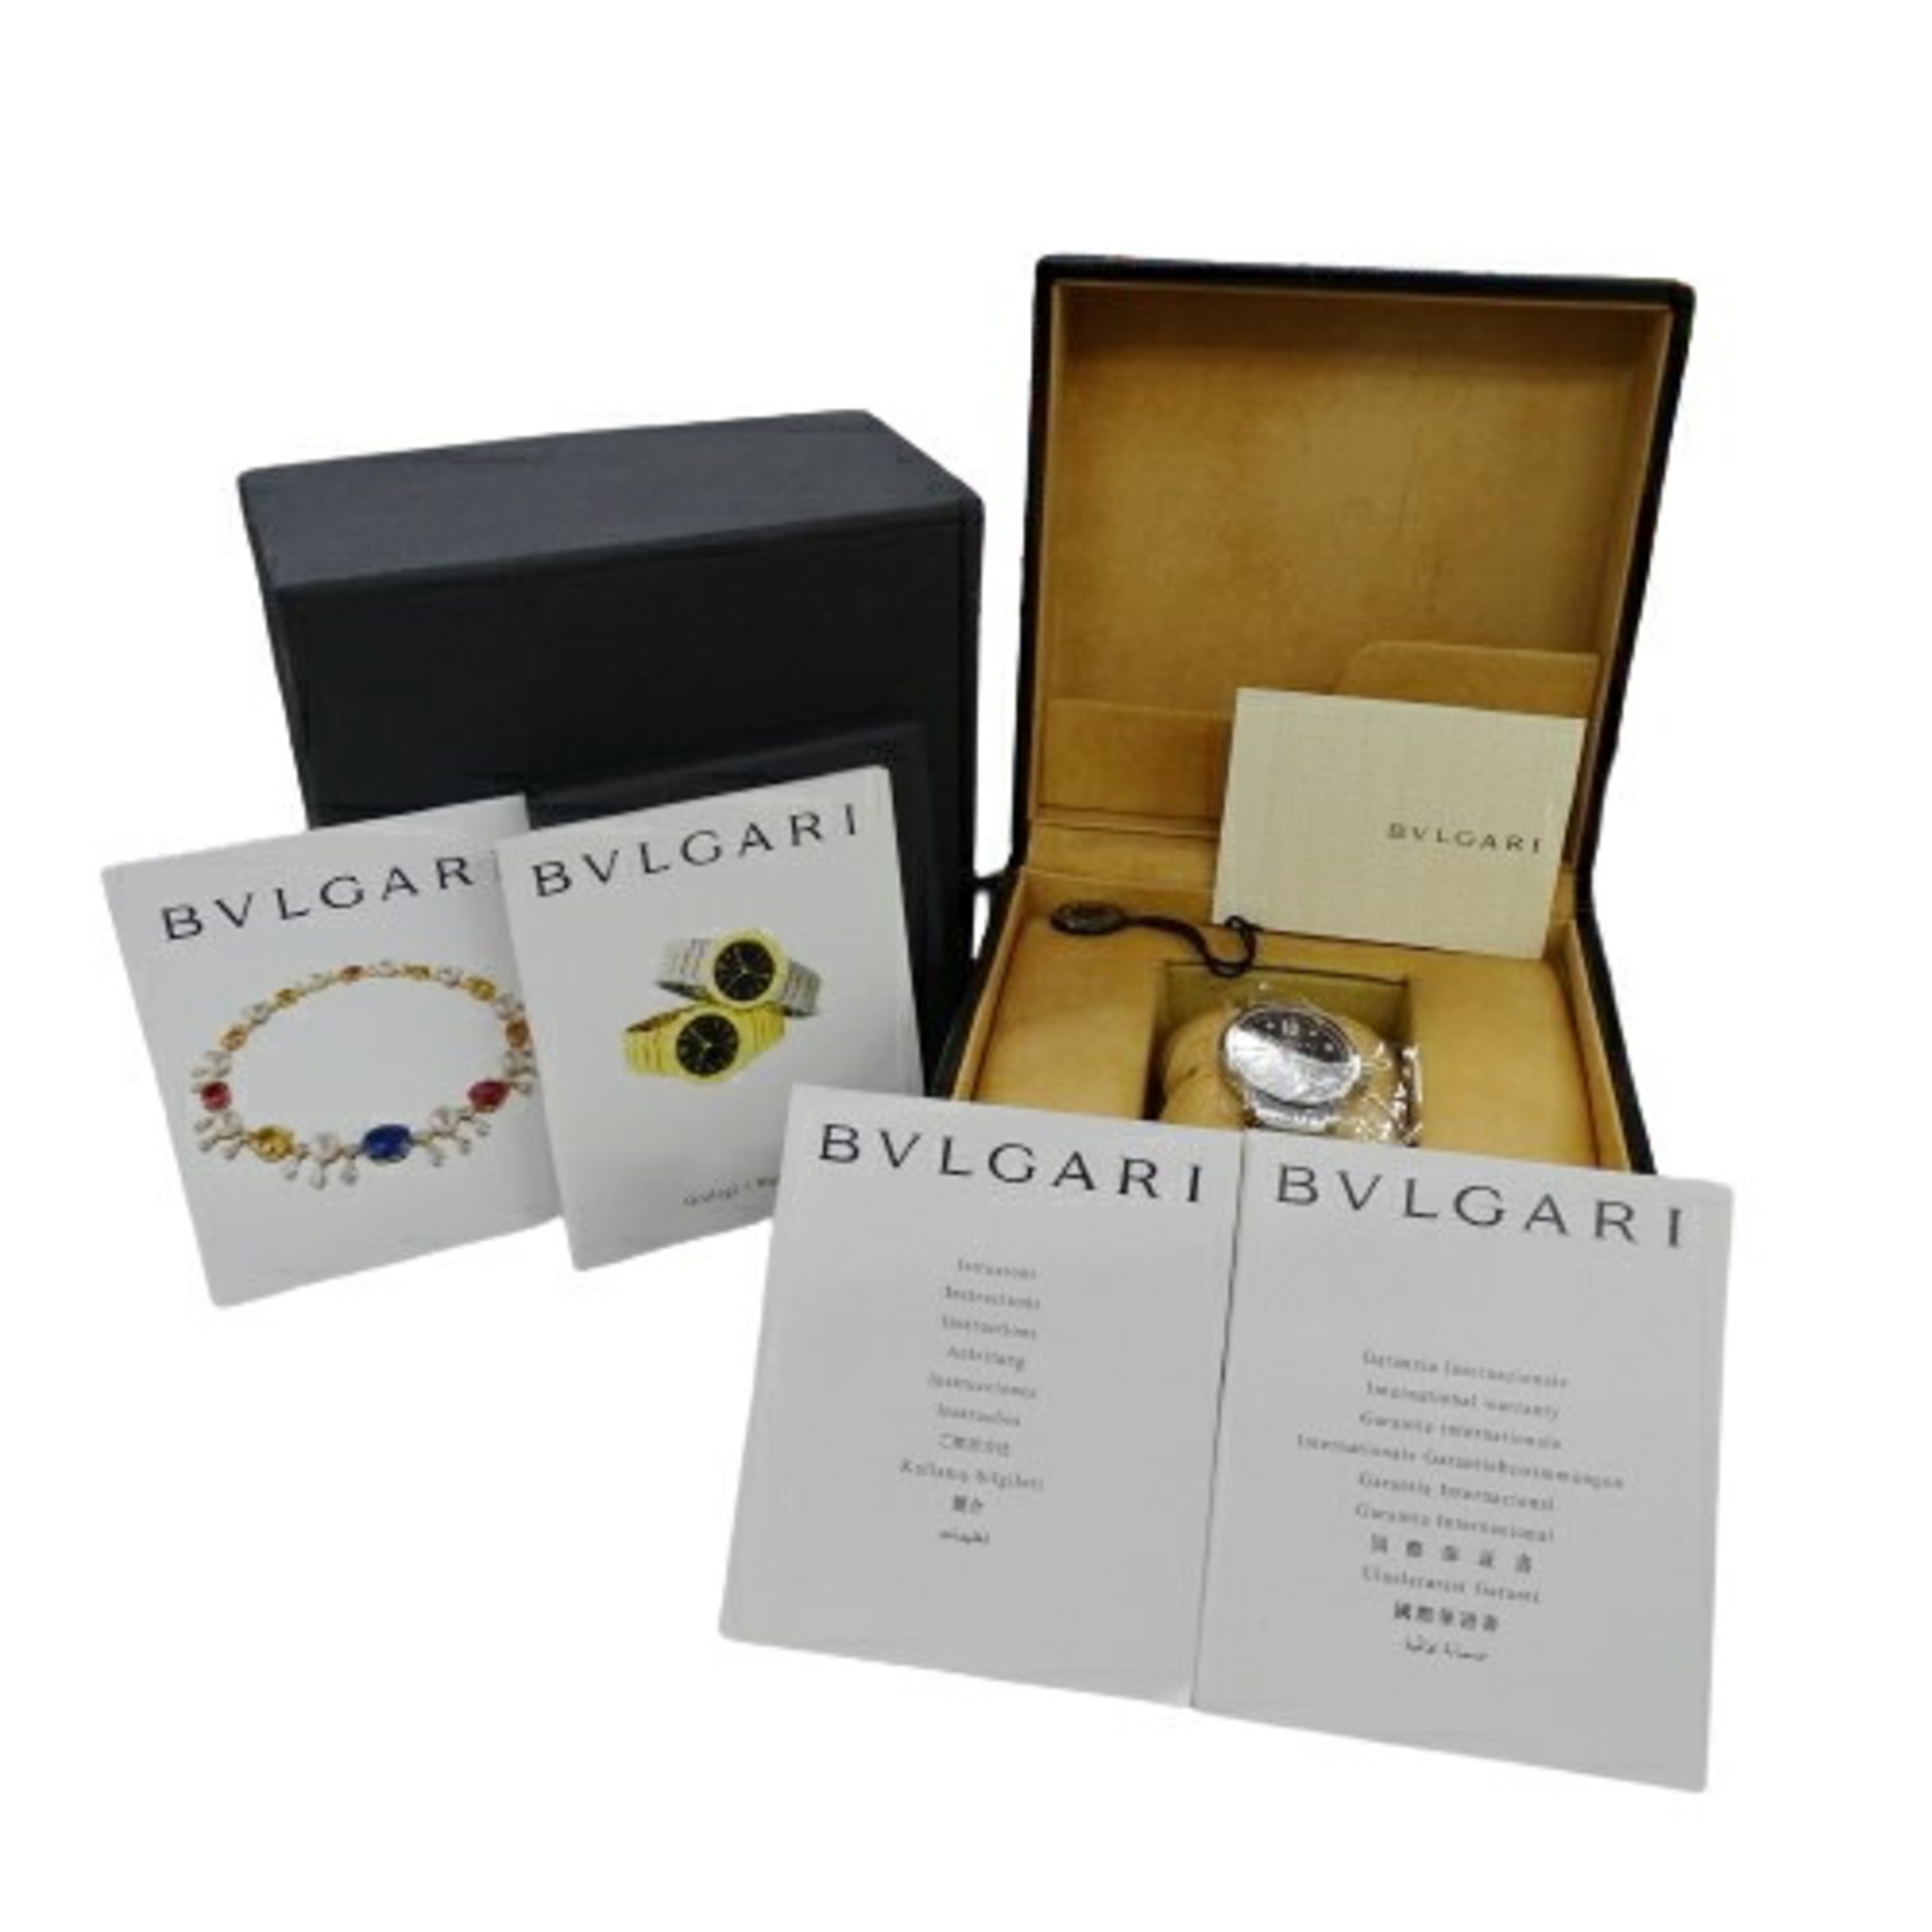 BVLGARI Women's Solotempo Watch, 10P Diamond Quartz, Stainless Steel, SS ST29S, Silver, Grey, Polished